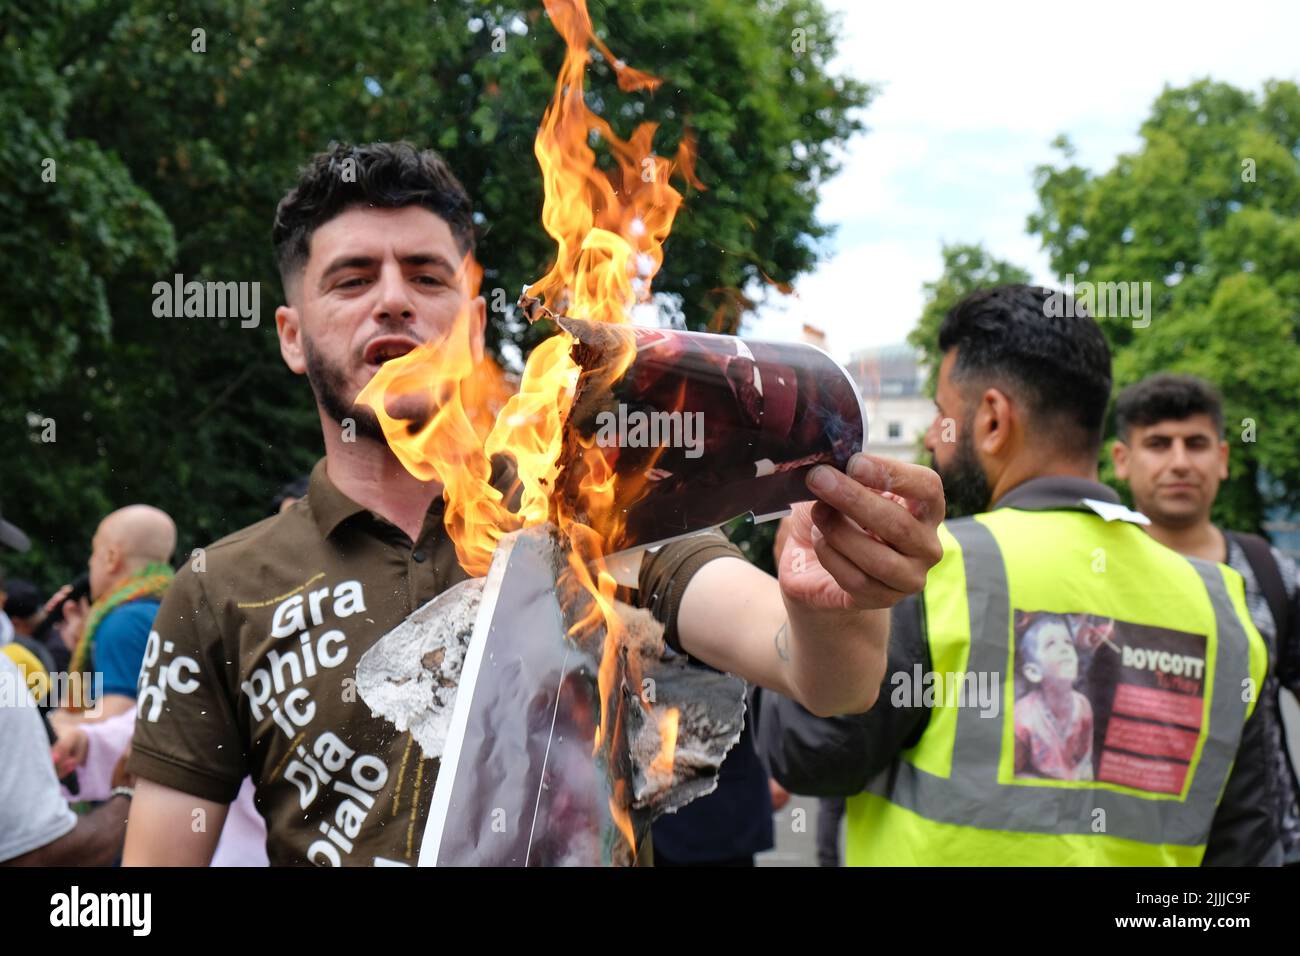 London, UK, 26th July, 2022. Members of the Kurdish community protest opposite the Turkish Embassy following artillery fire which killed nine civilians, including a baby, in a tourist area near the city of Zakho. Turkey denies involvement, blaming the Kurdistan Workers' Party (PKK) for the incident, though it is believe the group do no have any artillery based there. Credit: Eleventh Hour Photography/Alamy Live News Stock Photo